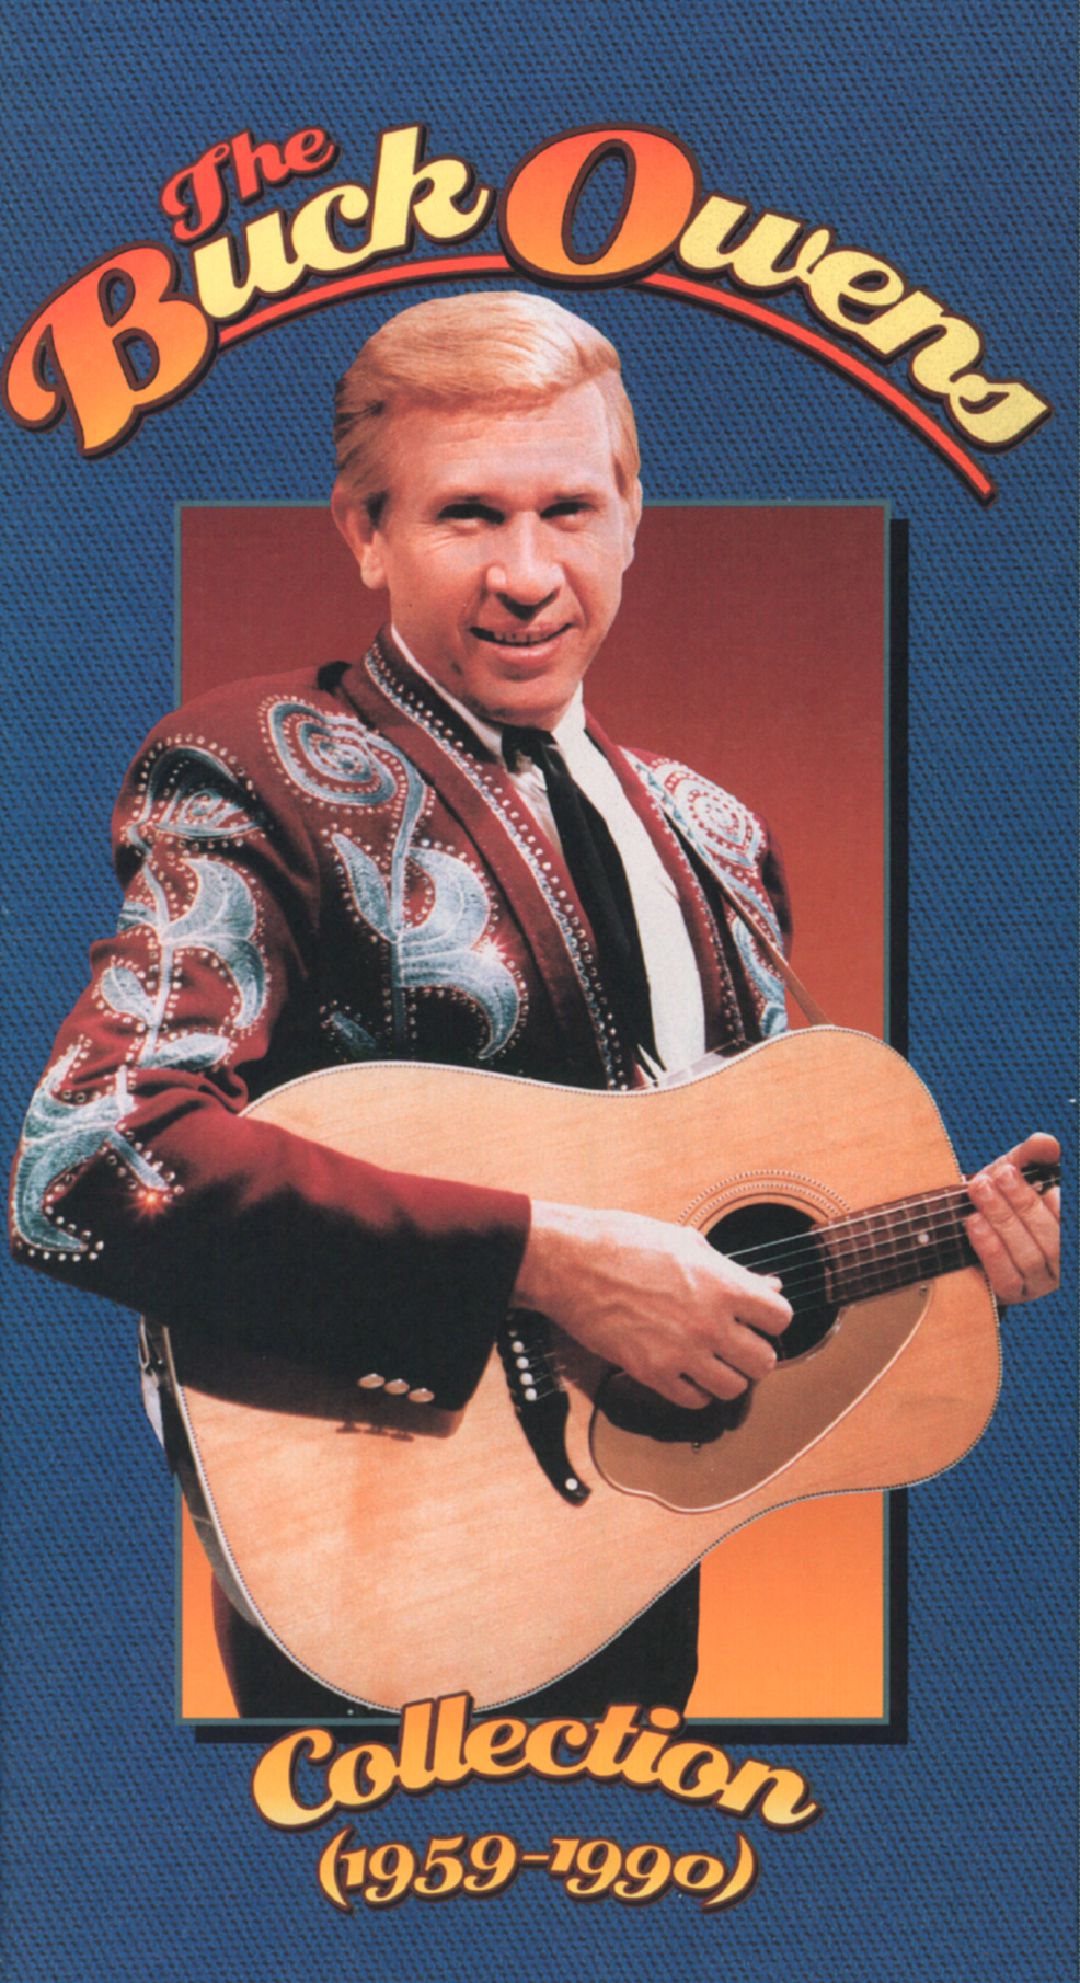 The Buck Owens Collection (1959-1990) - Buck Owens | Songs, Reviews ...